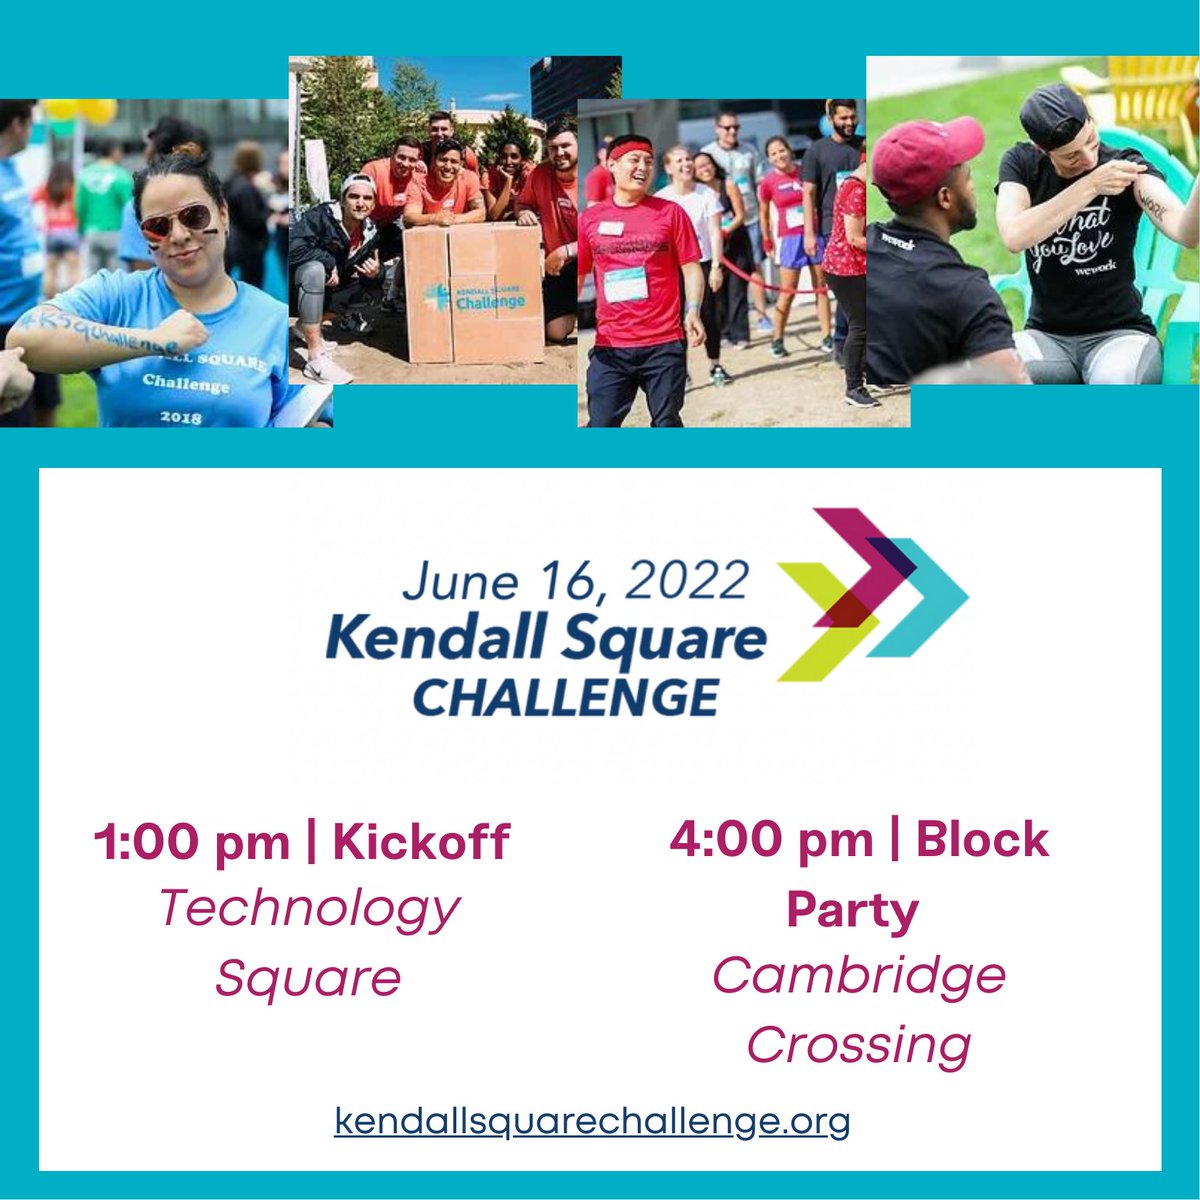 Due to inclement weather, the Kendall Square Challenge has been moved to next Thursday, June 16th. We can't wait to see you there! #KSQChallenge kendallsquarechallenge.org